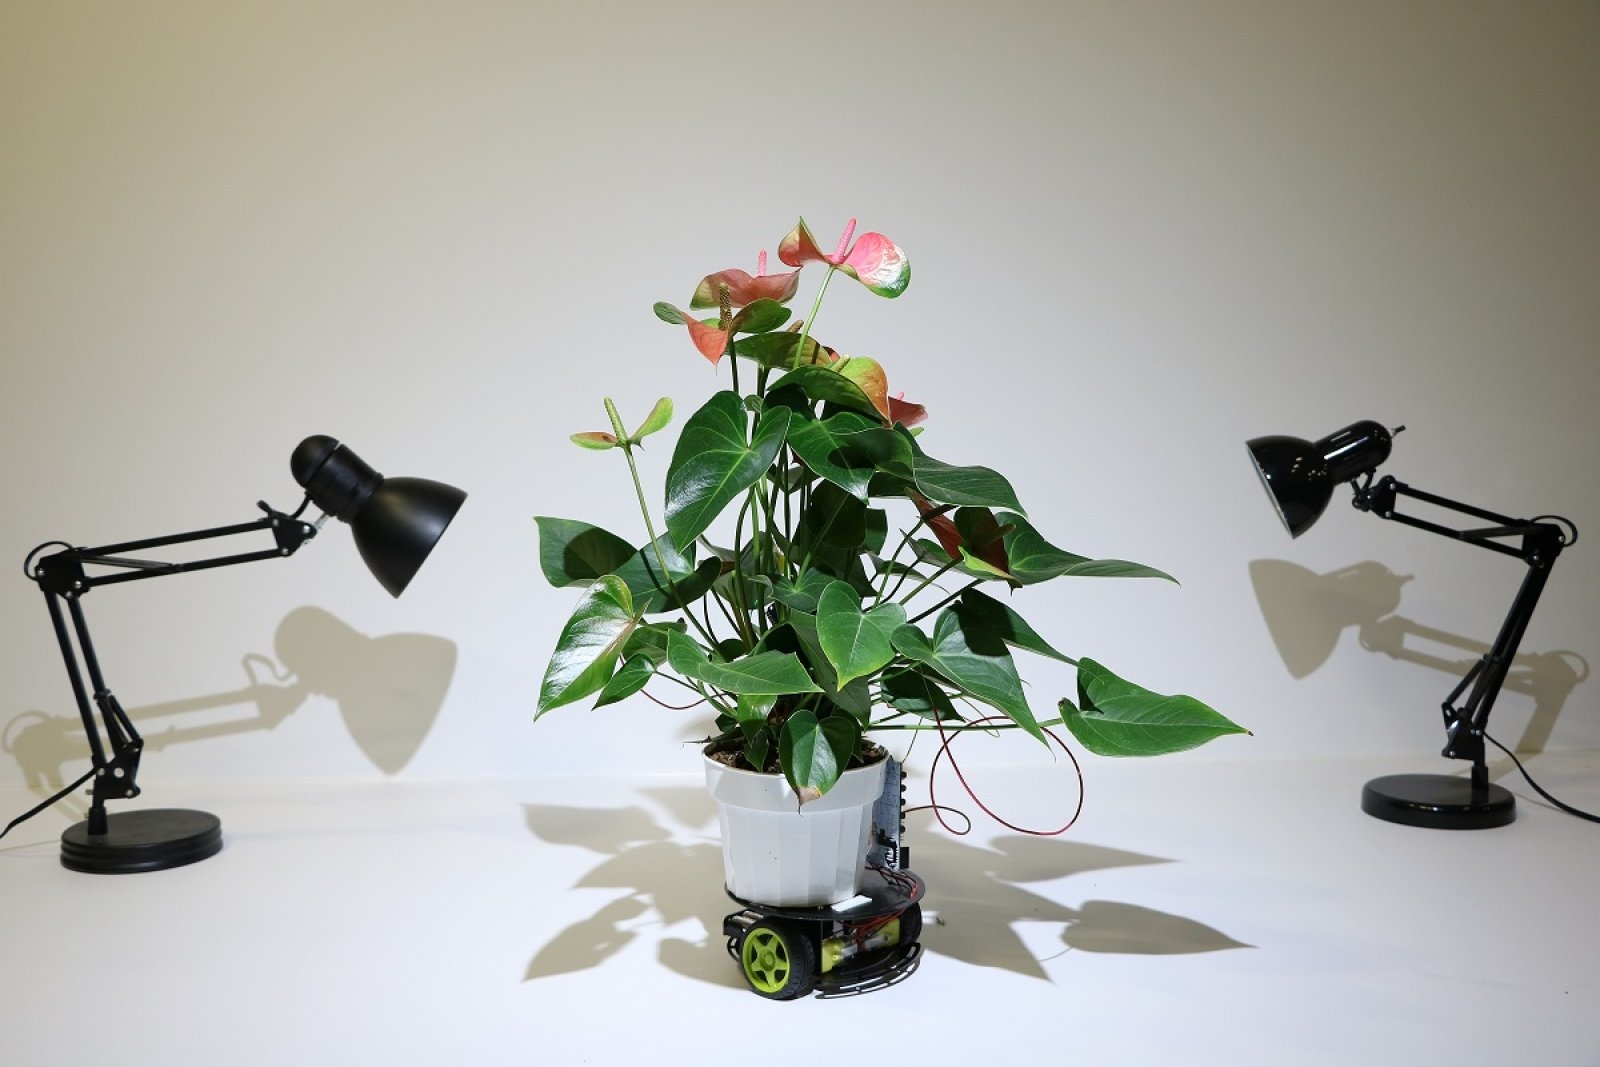 MIT researchers create a robot houseplant that moves on its own | DeviceDaily.com